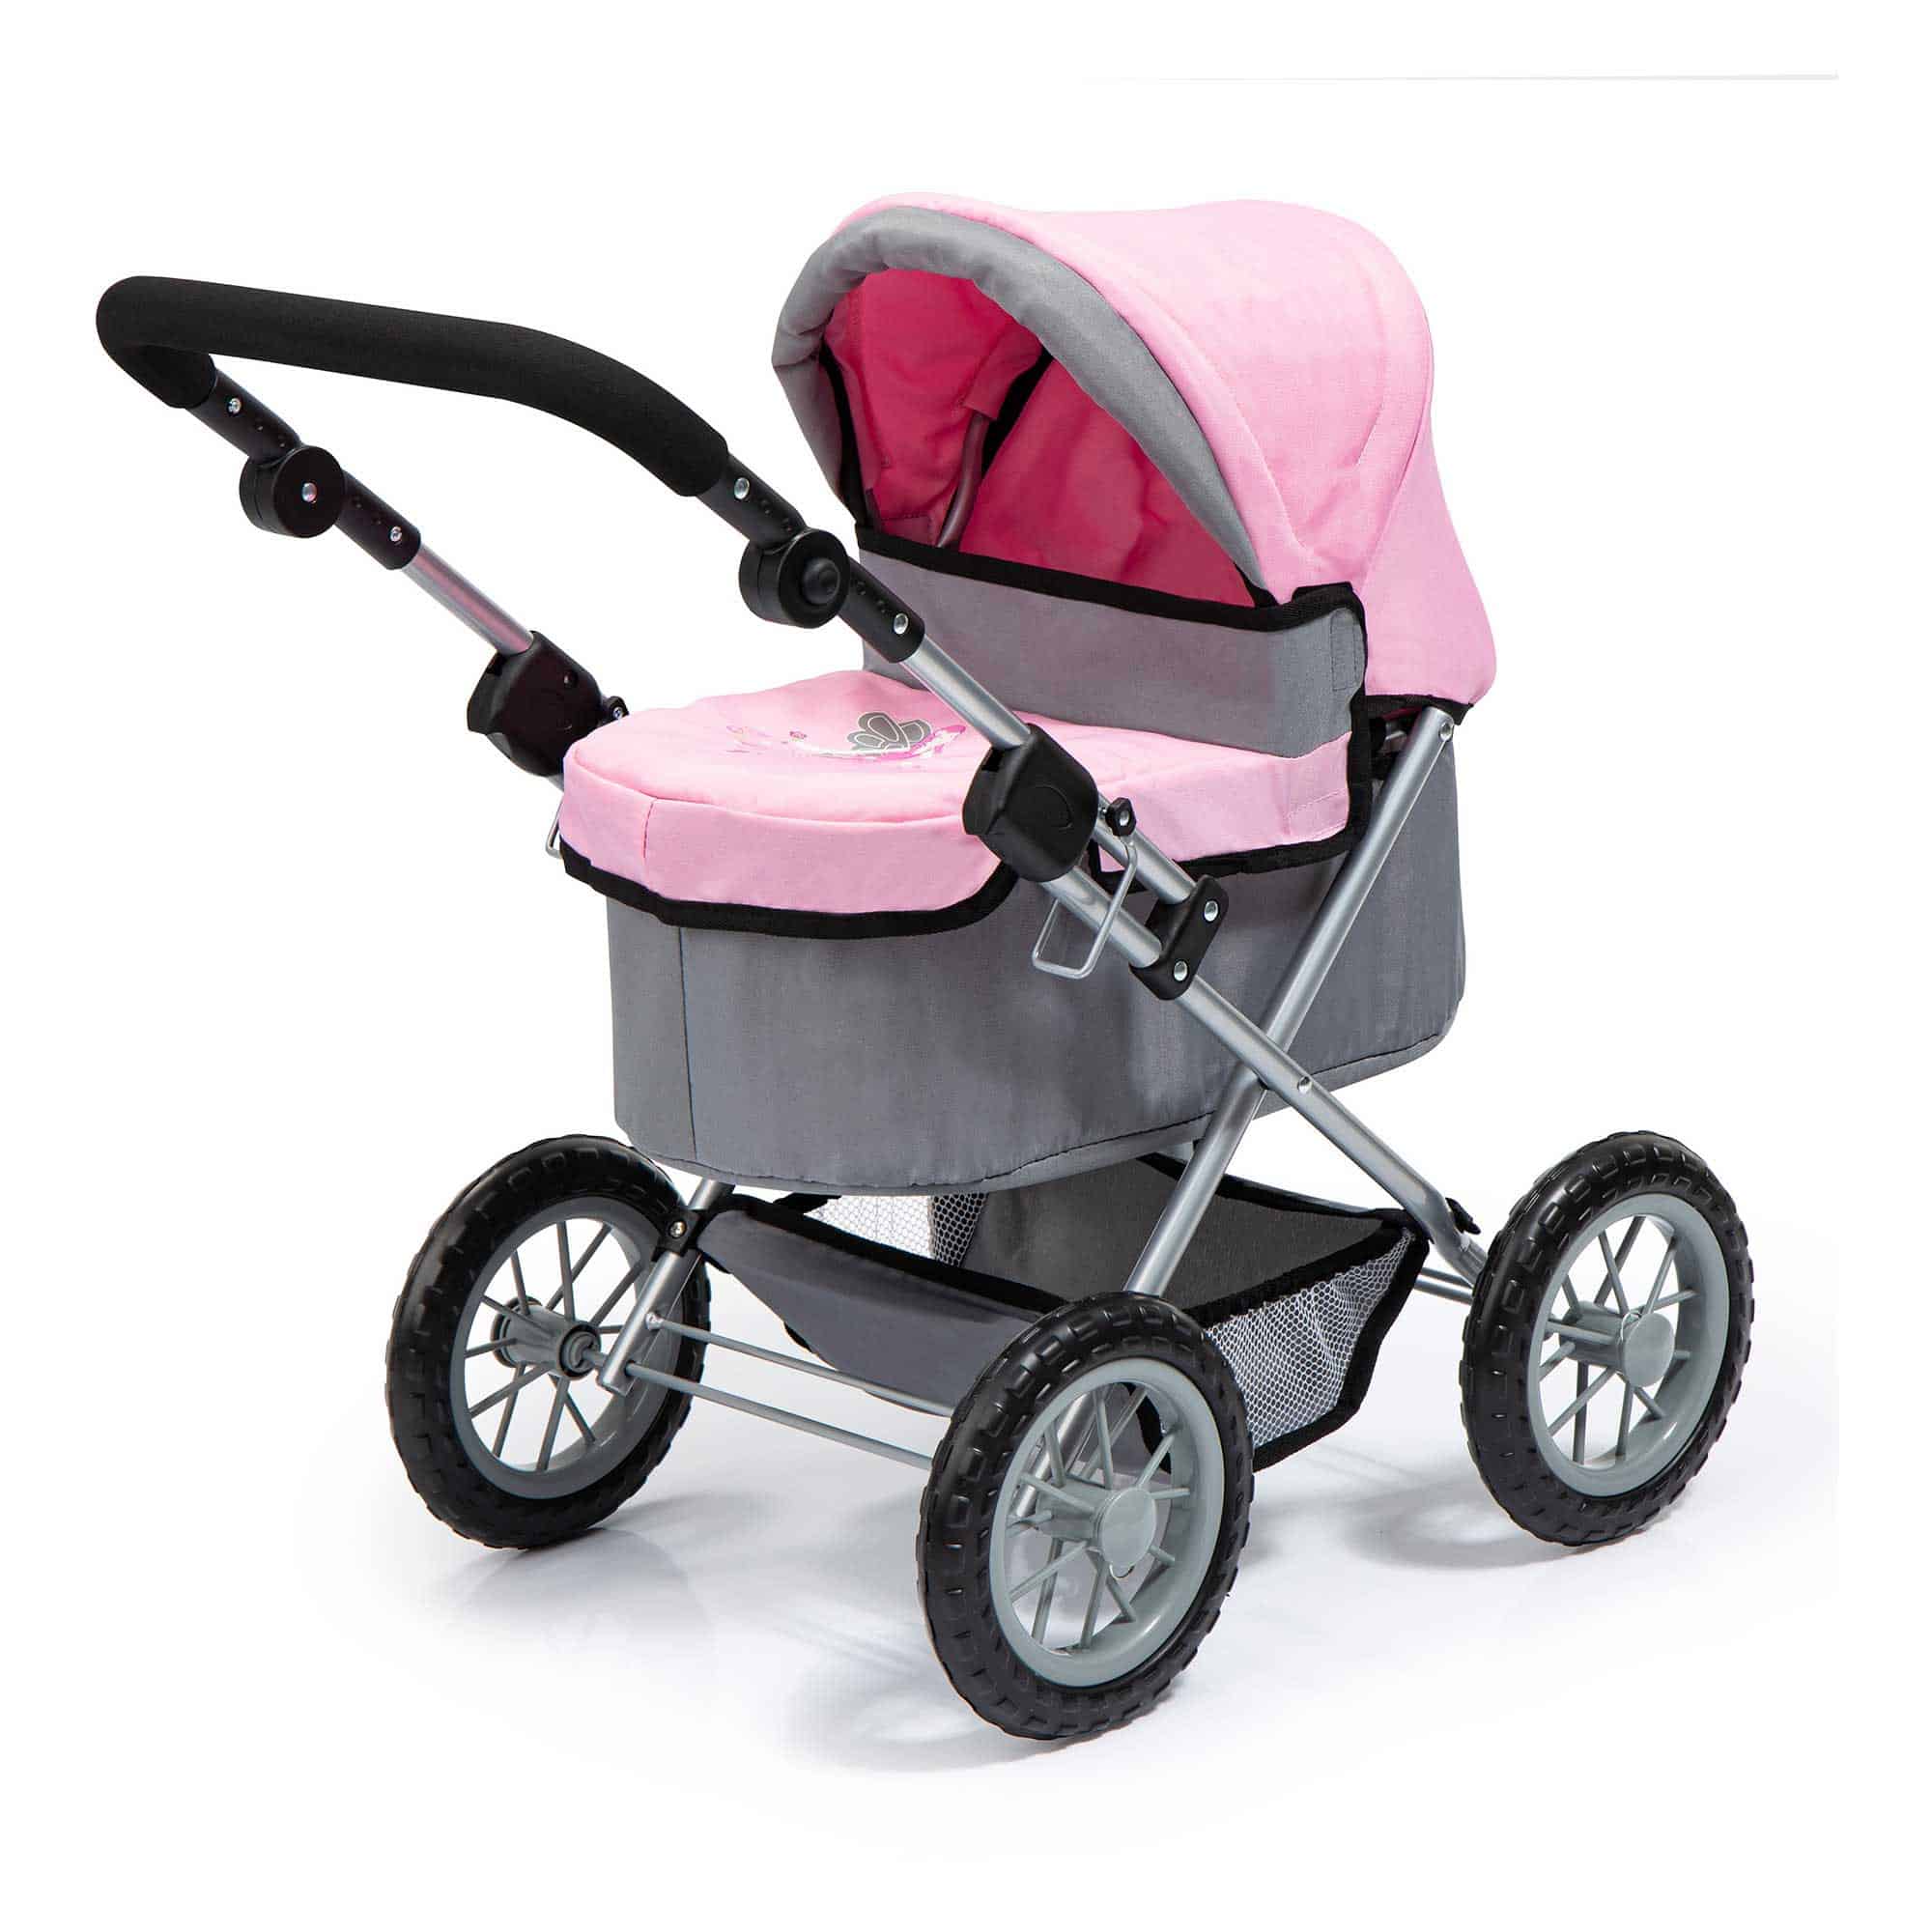 Bayer Trendy Pram - Grey with Pink Trim and Fairy